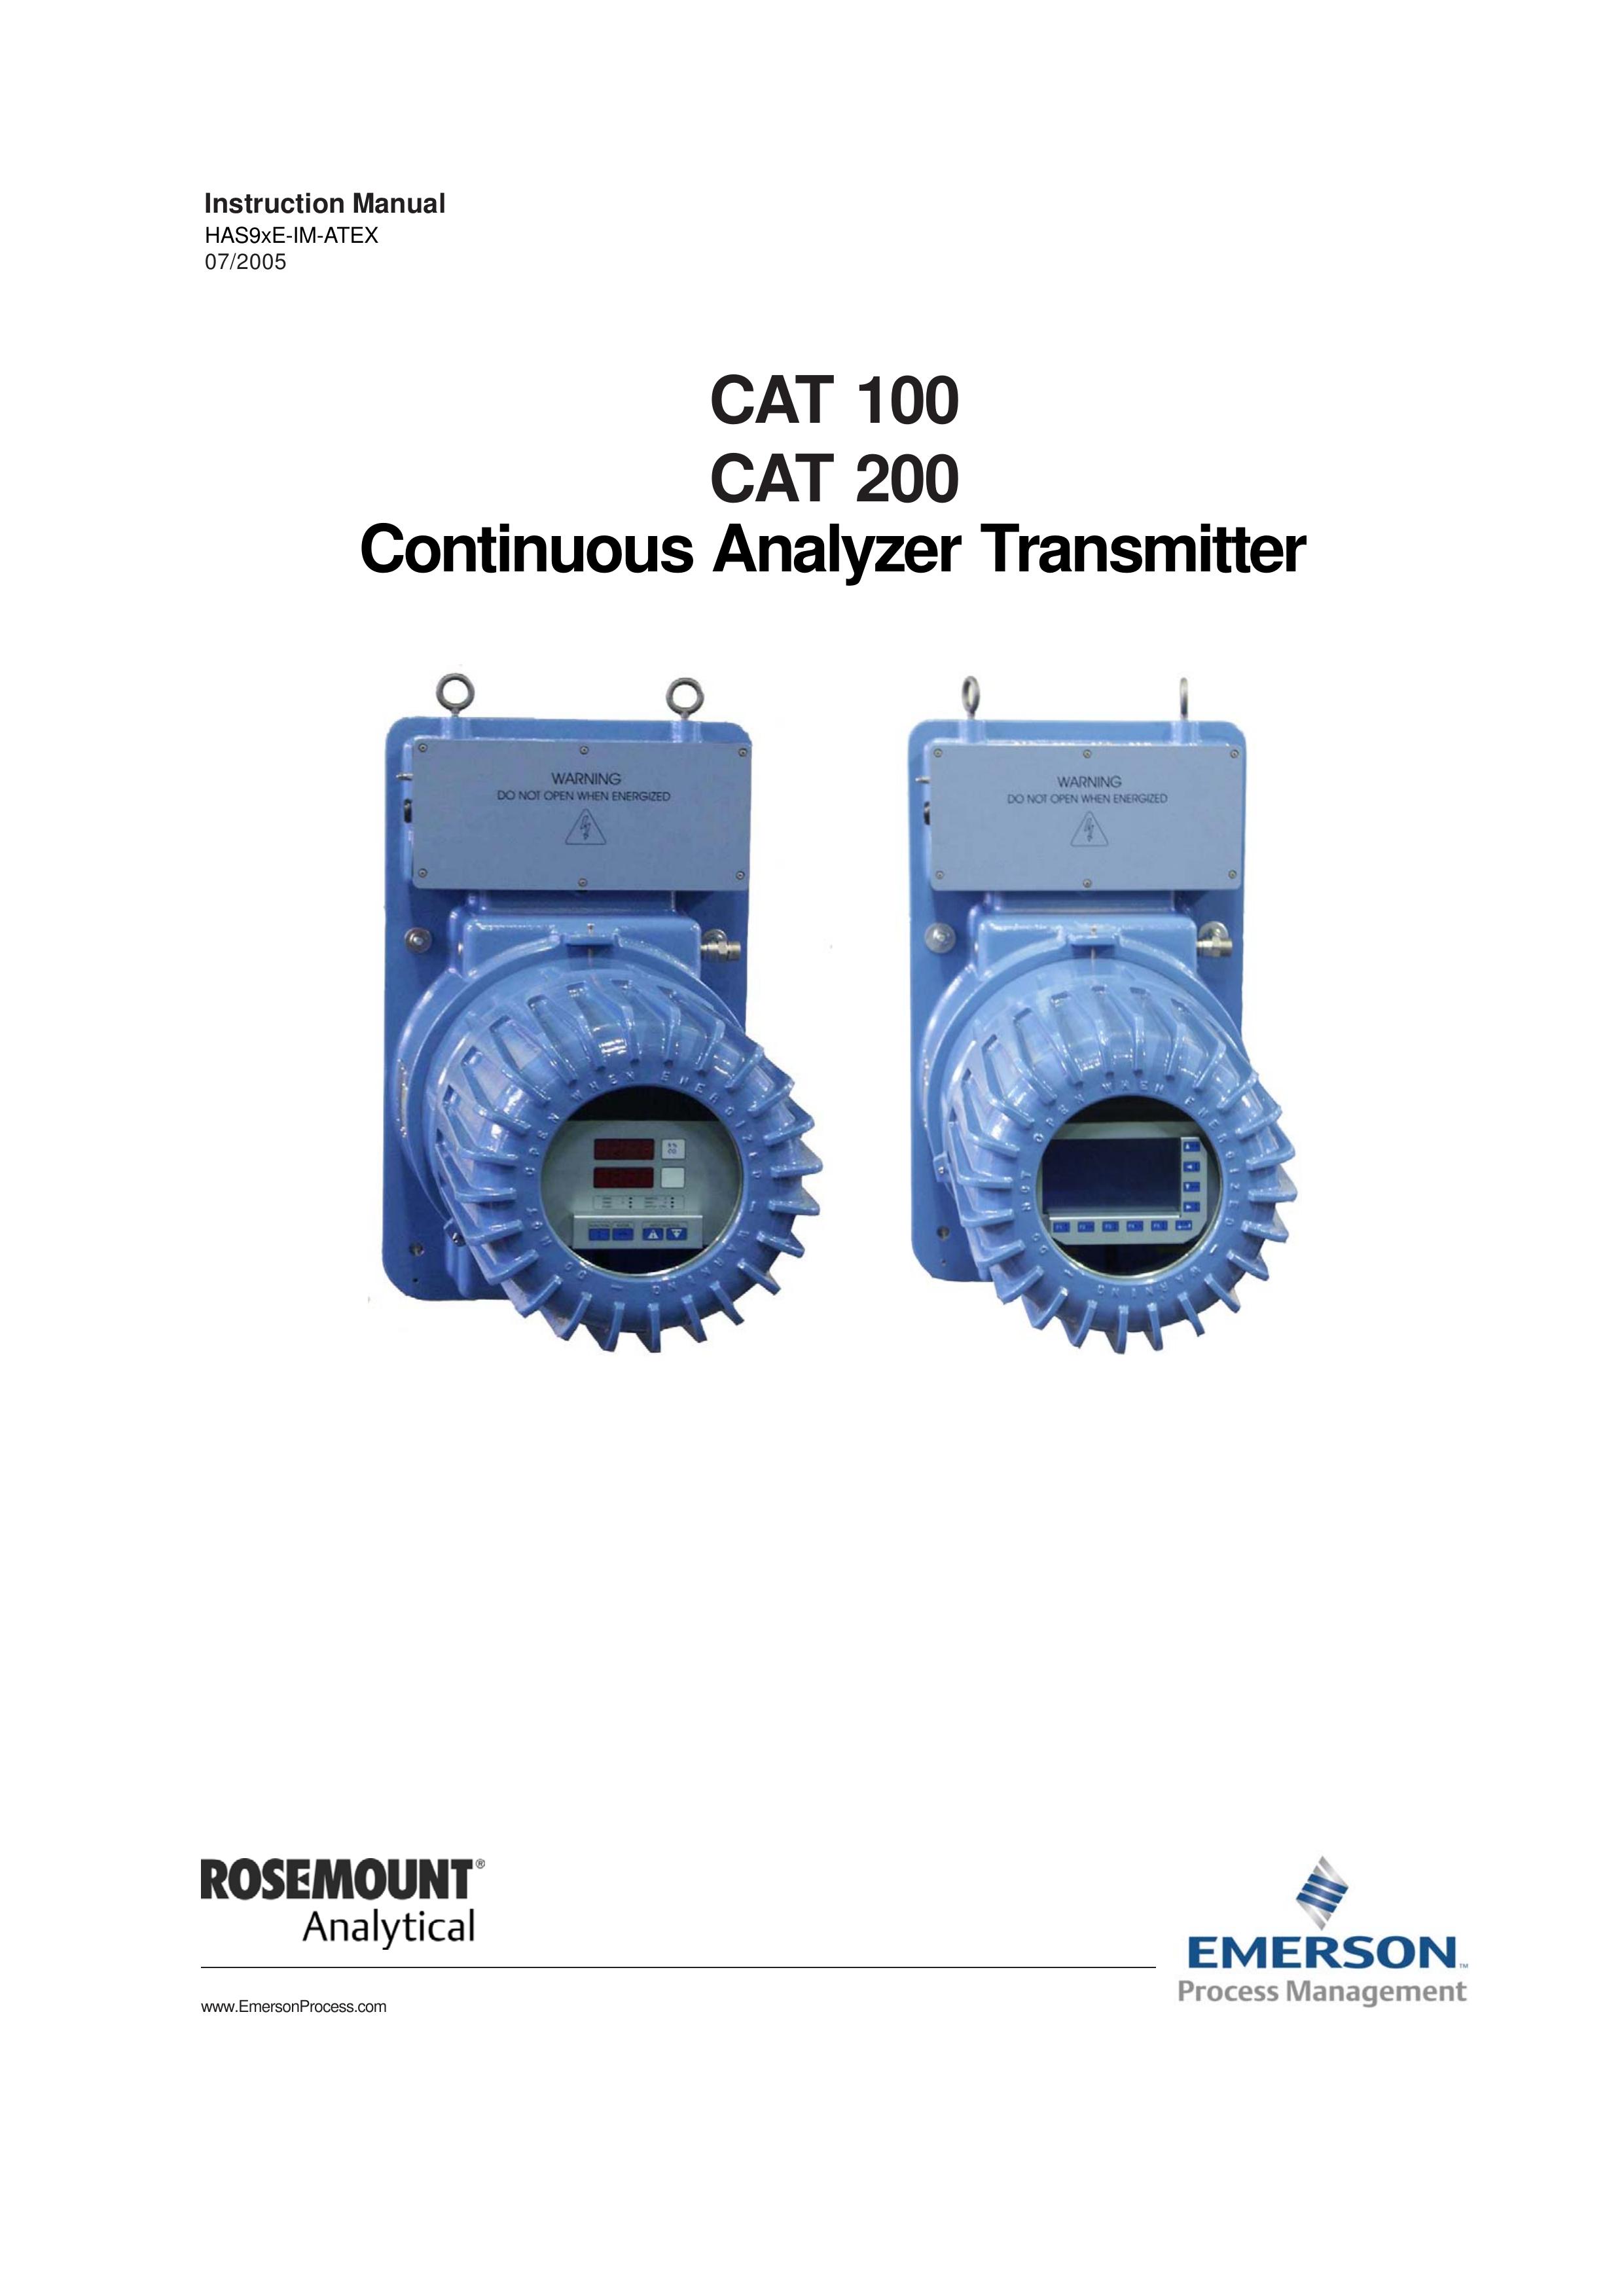 Emerson CAT 100 Pacemaker User Manual